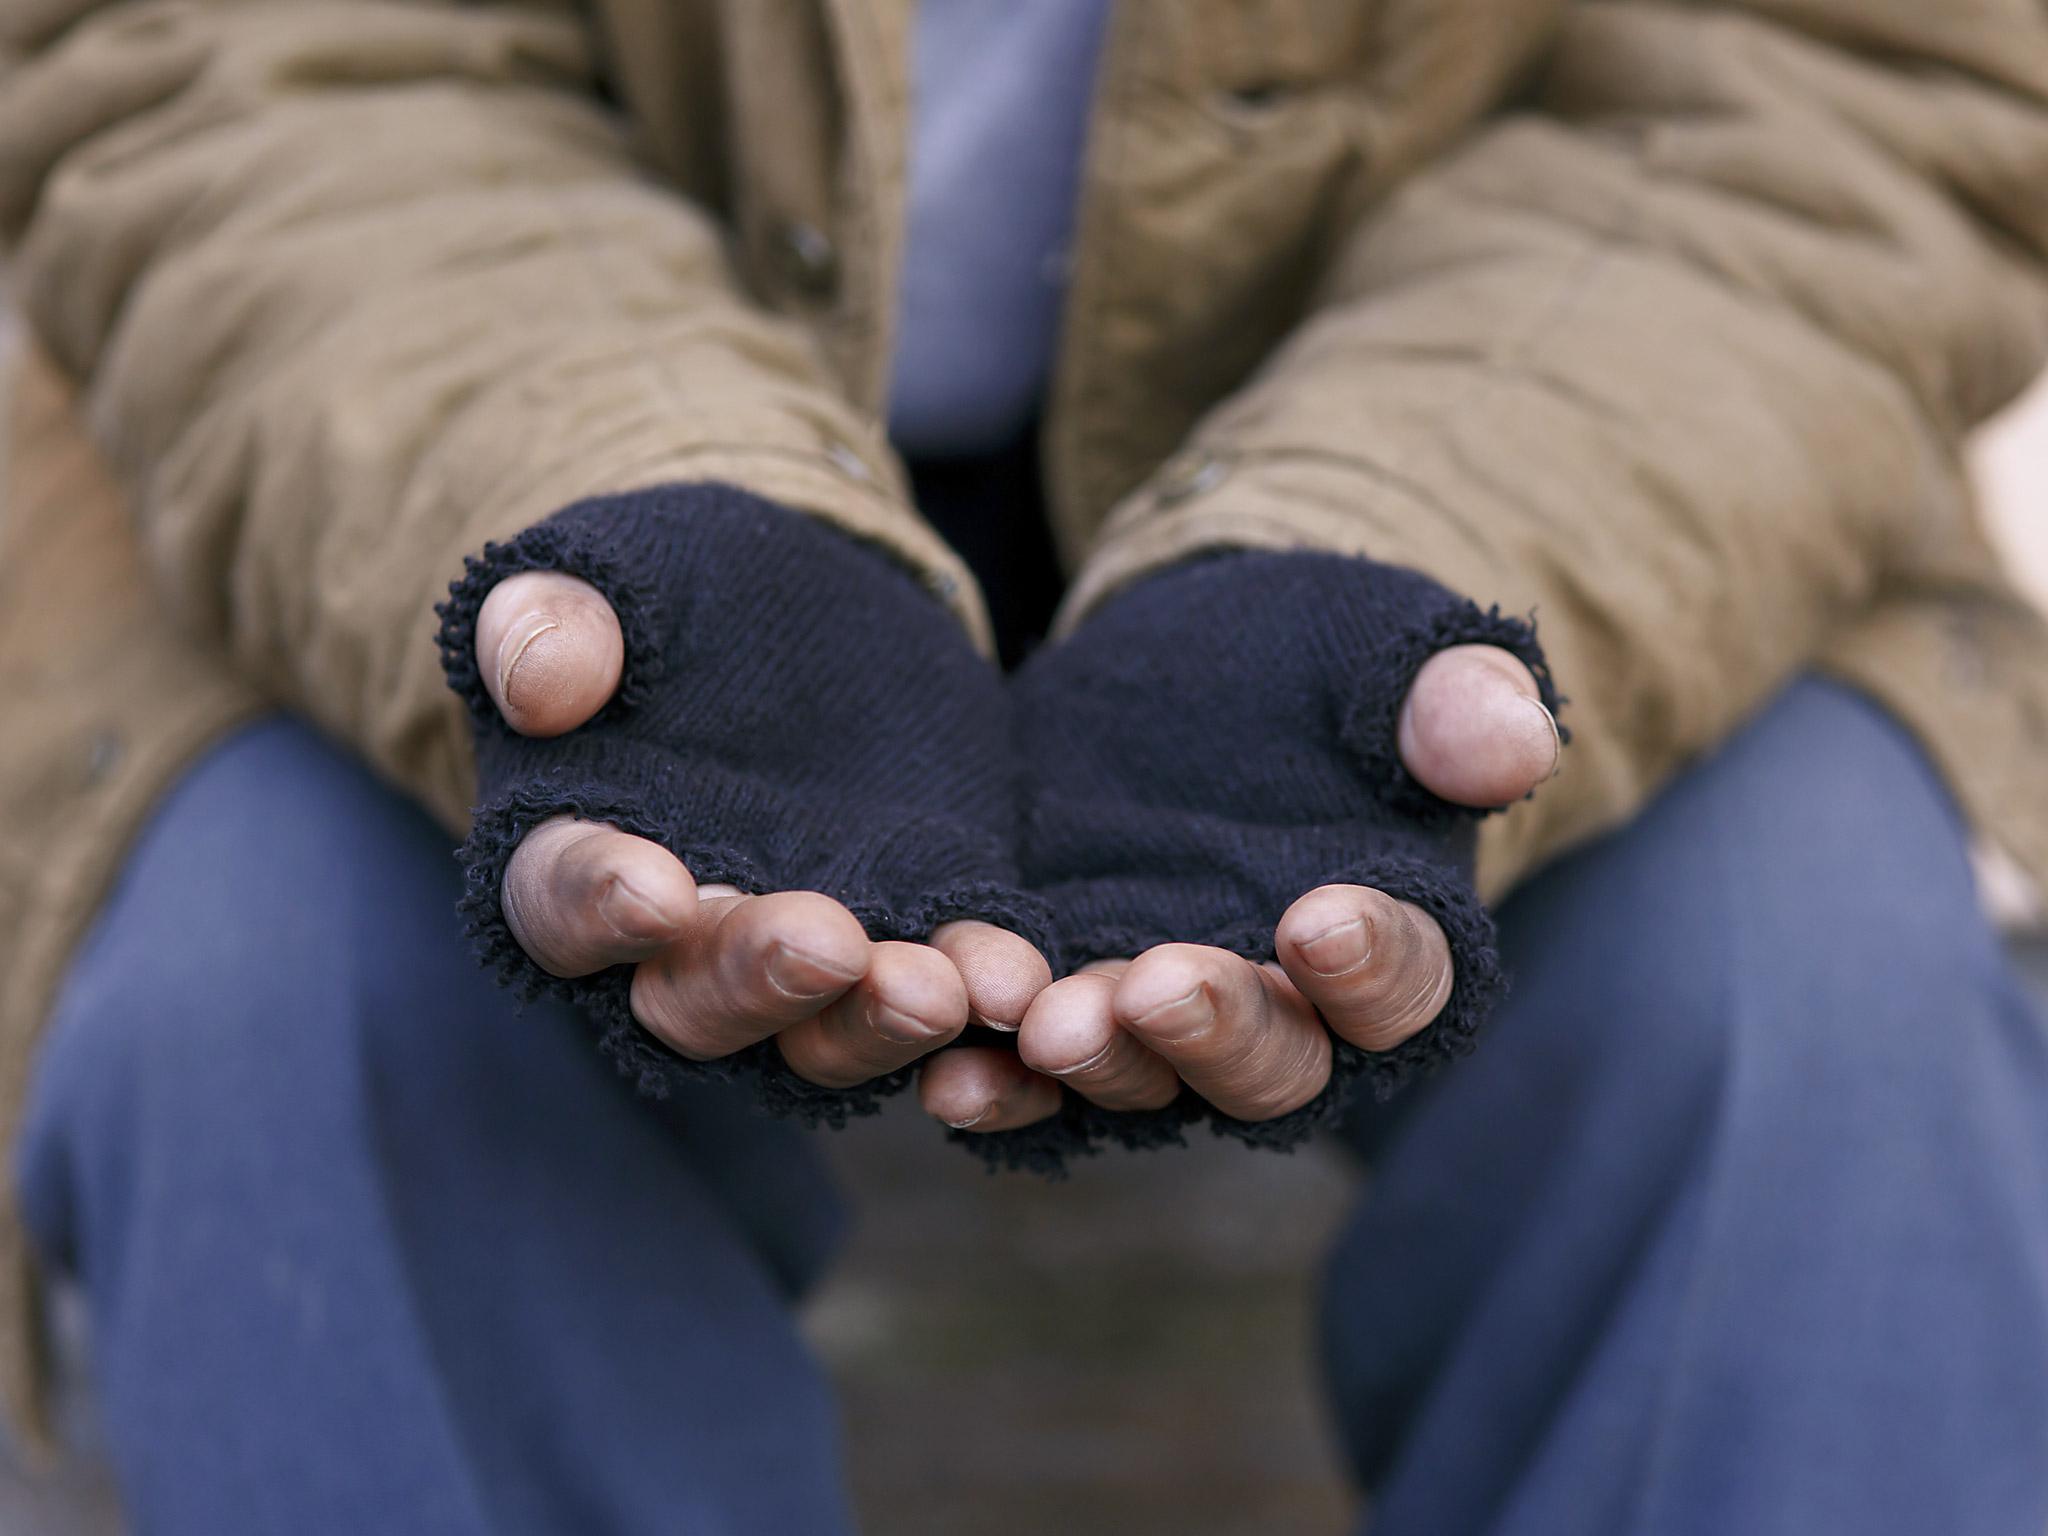 Is begging just a scam, or a lifeline for those most in need? | The ...